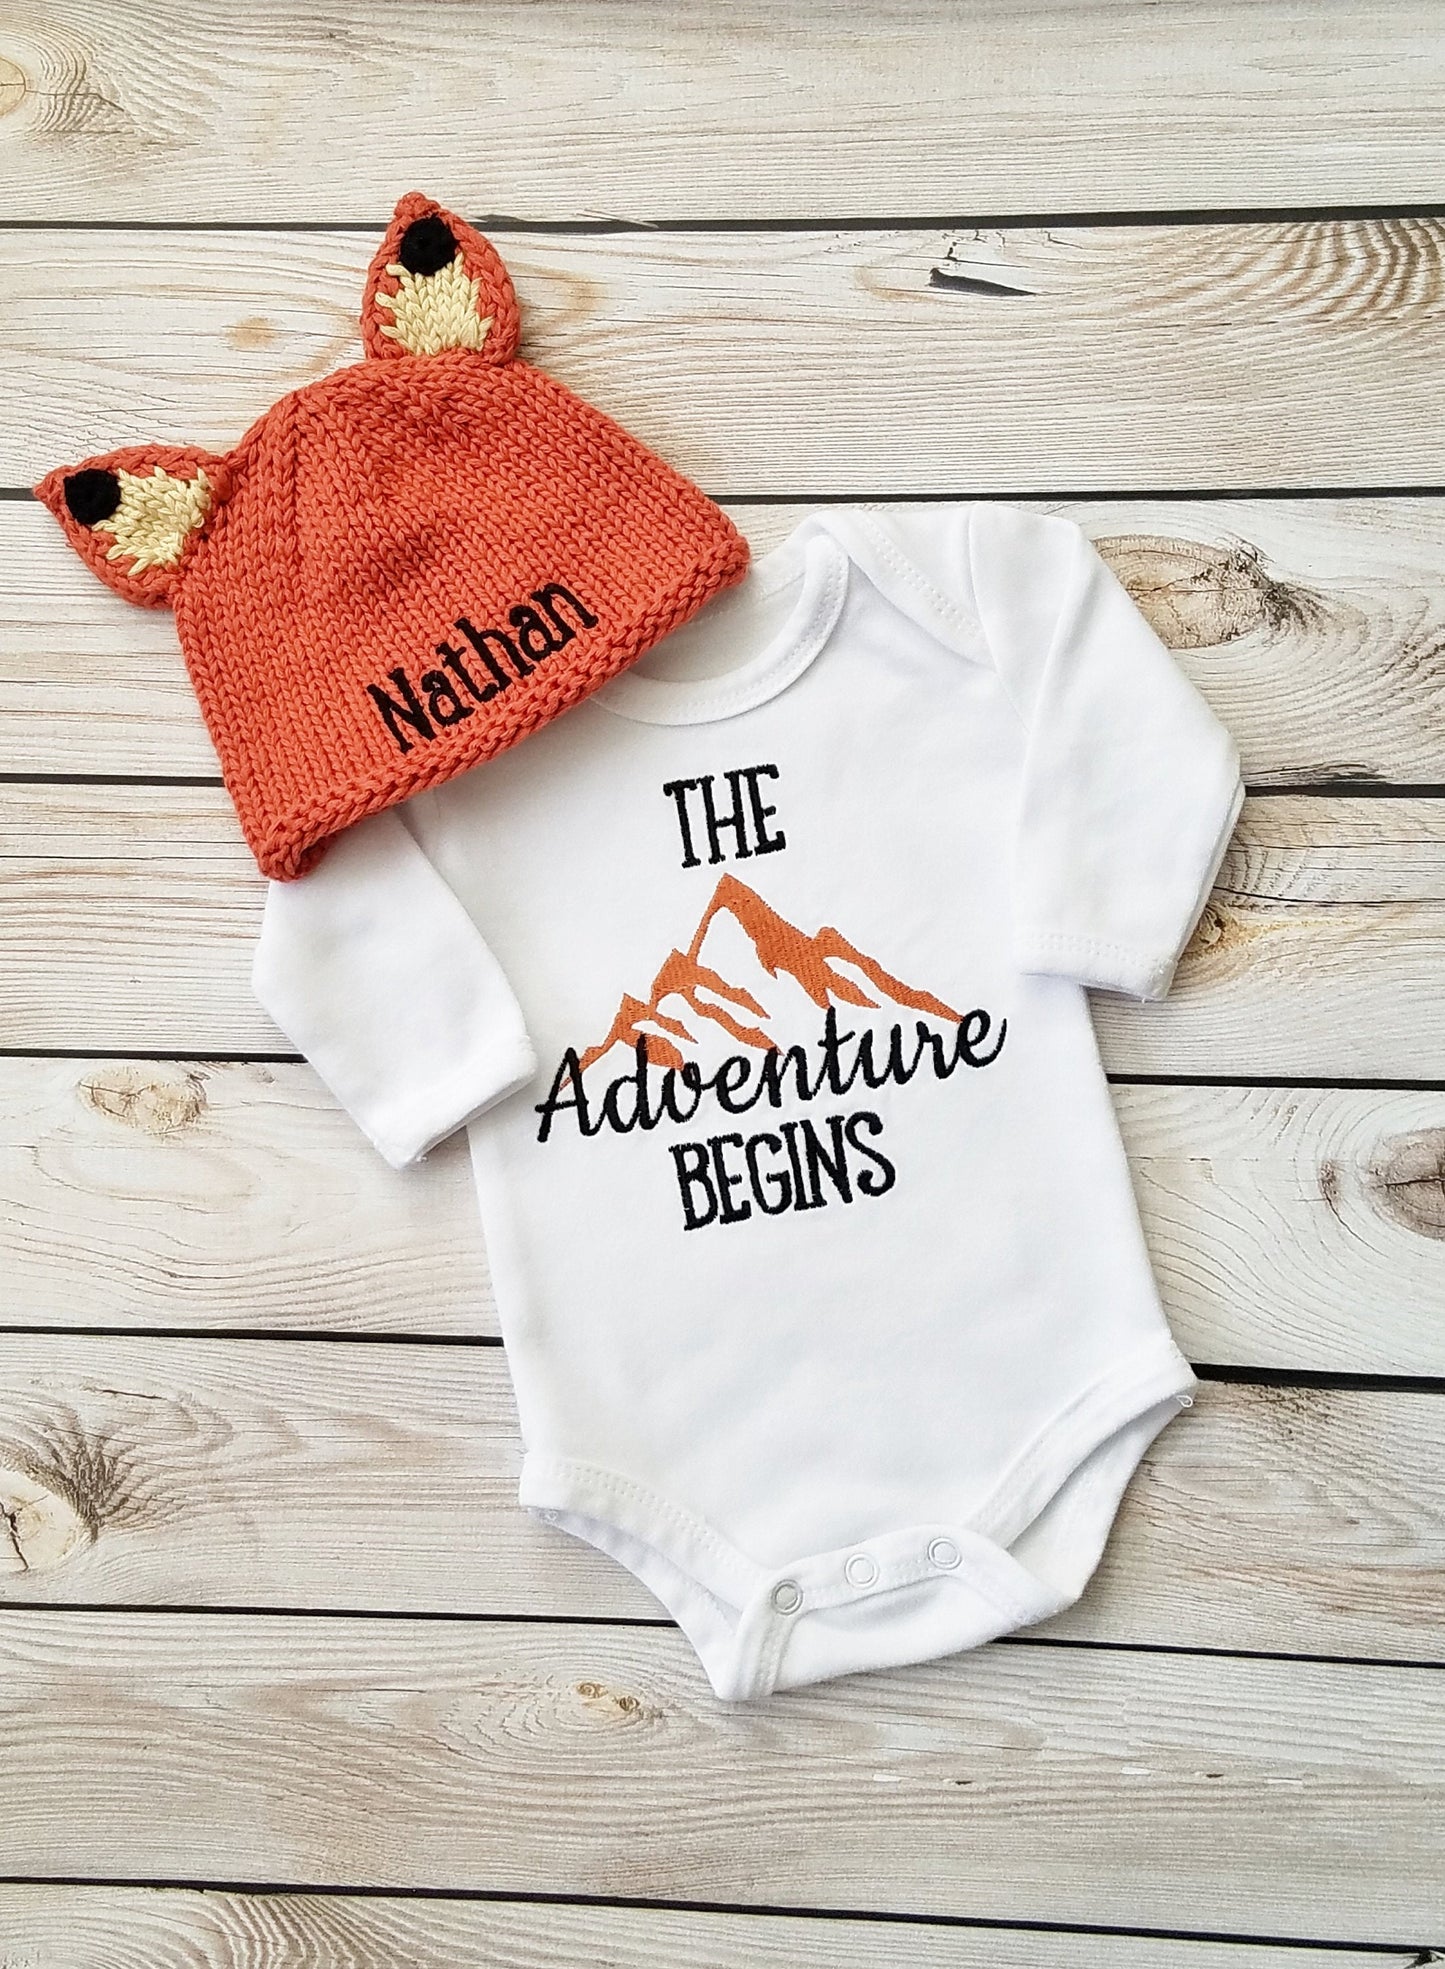 Personalized Boy Fox Outfit, with Personalized Knitted Fox Hat